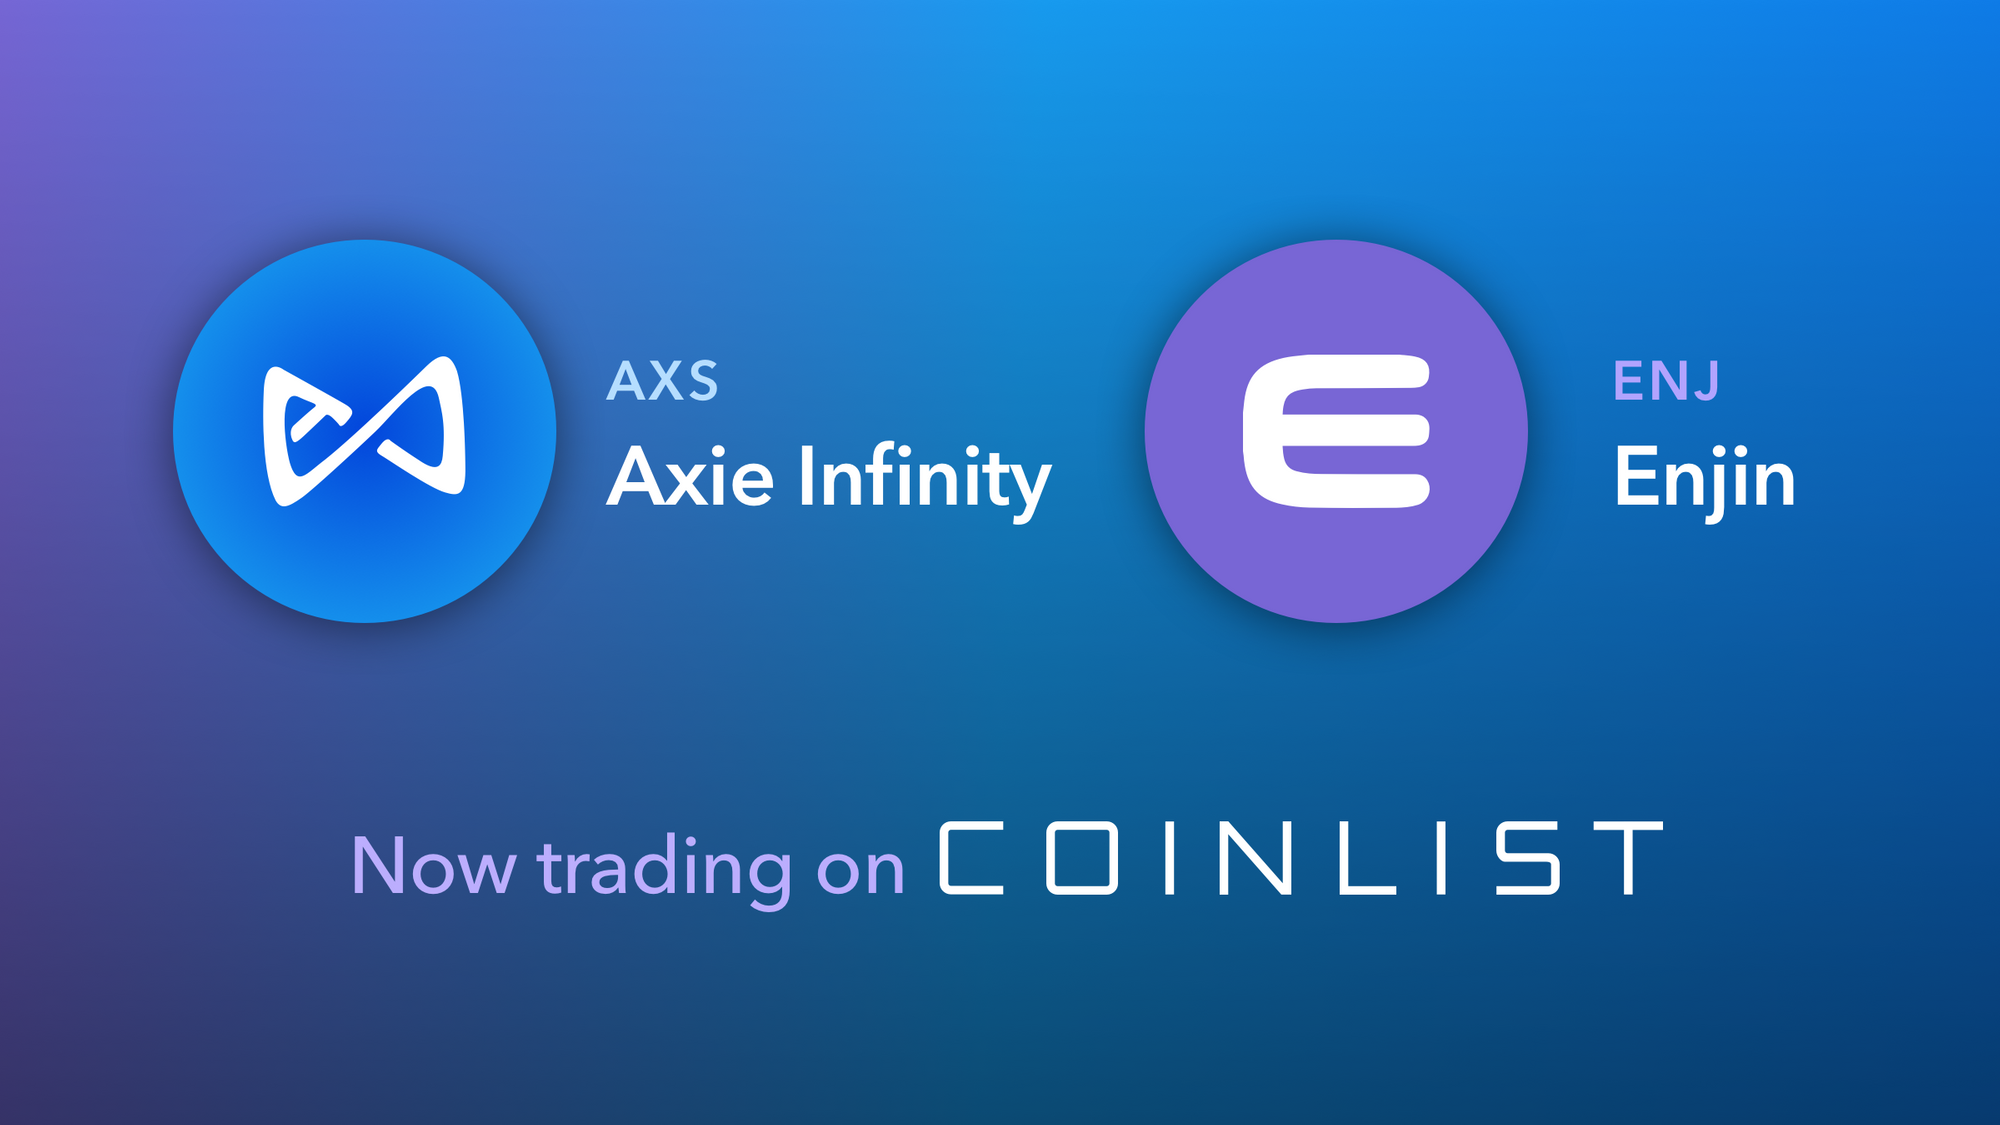 Axie Infinity (AXS) and Enjin Coin (ENJ) now trading on CoinList